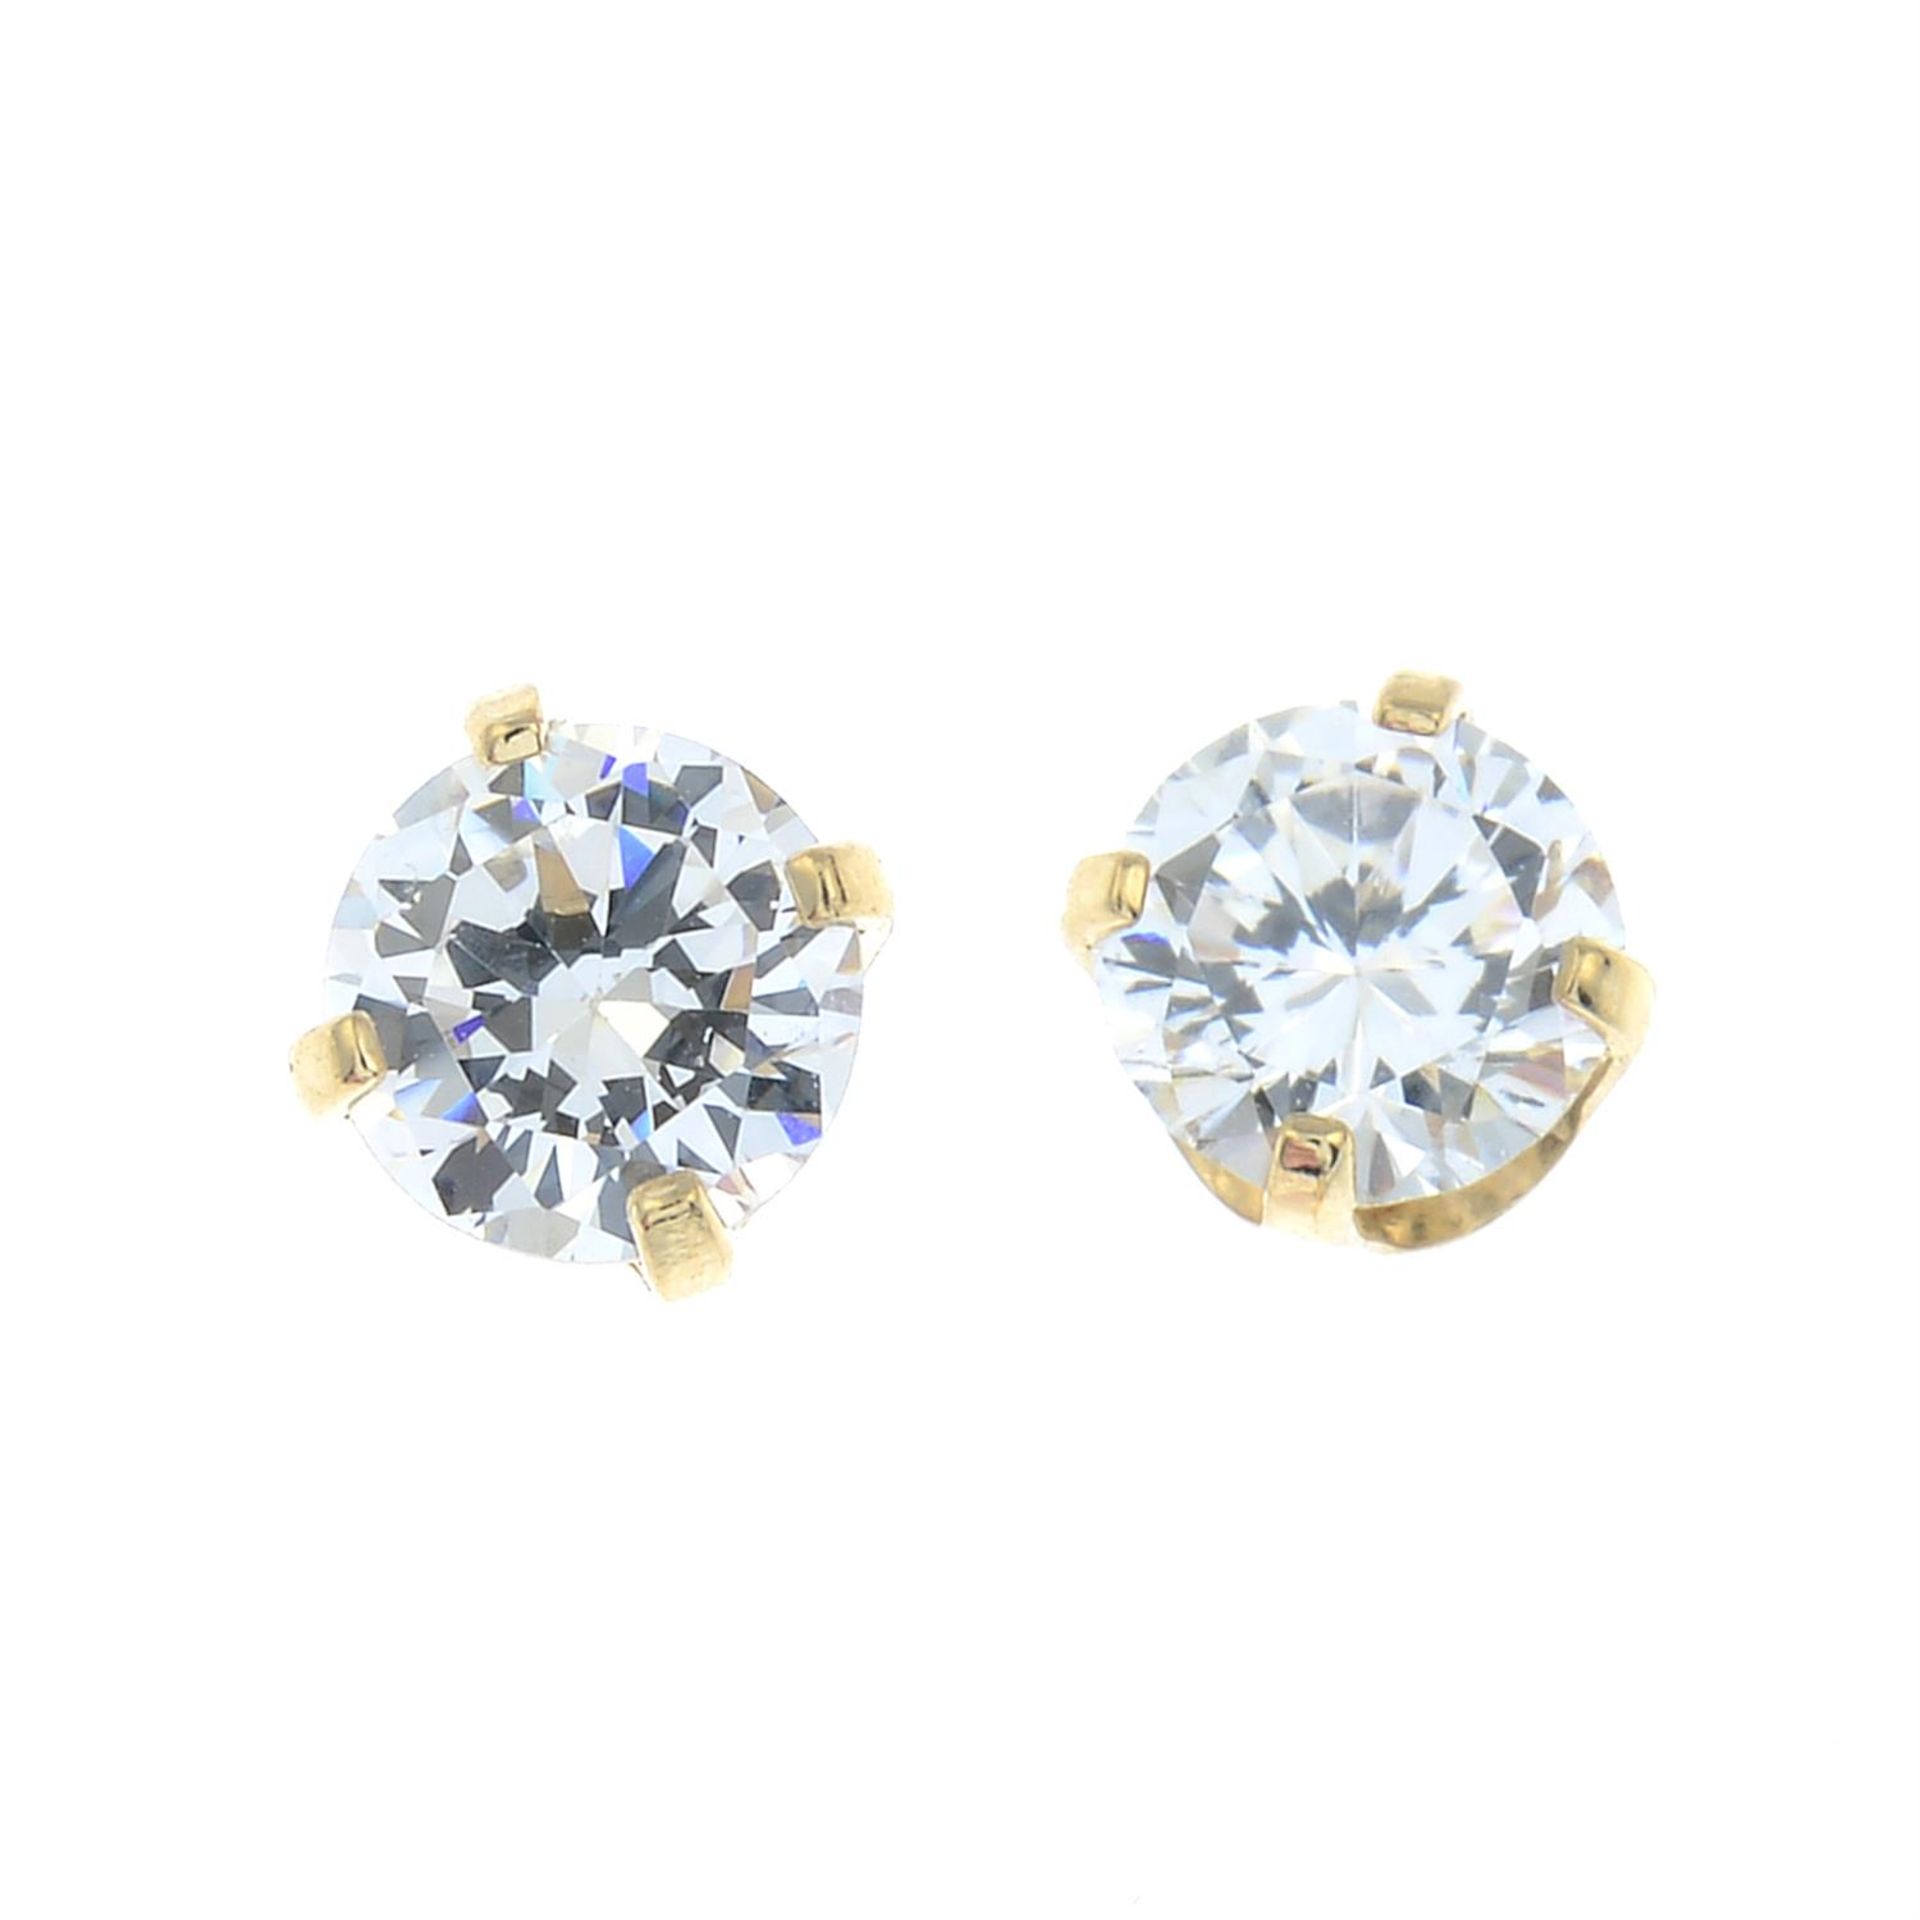 A pair of 14ct gold cubic zirconia single-stone stud earrings.